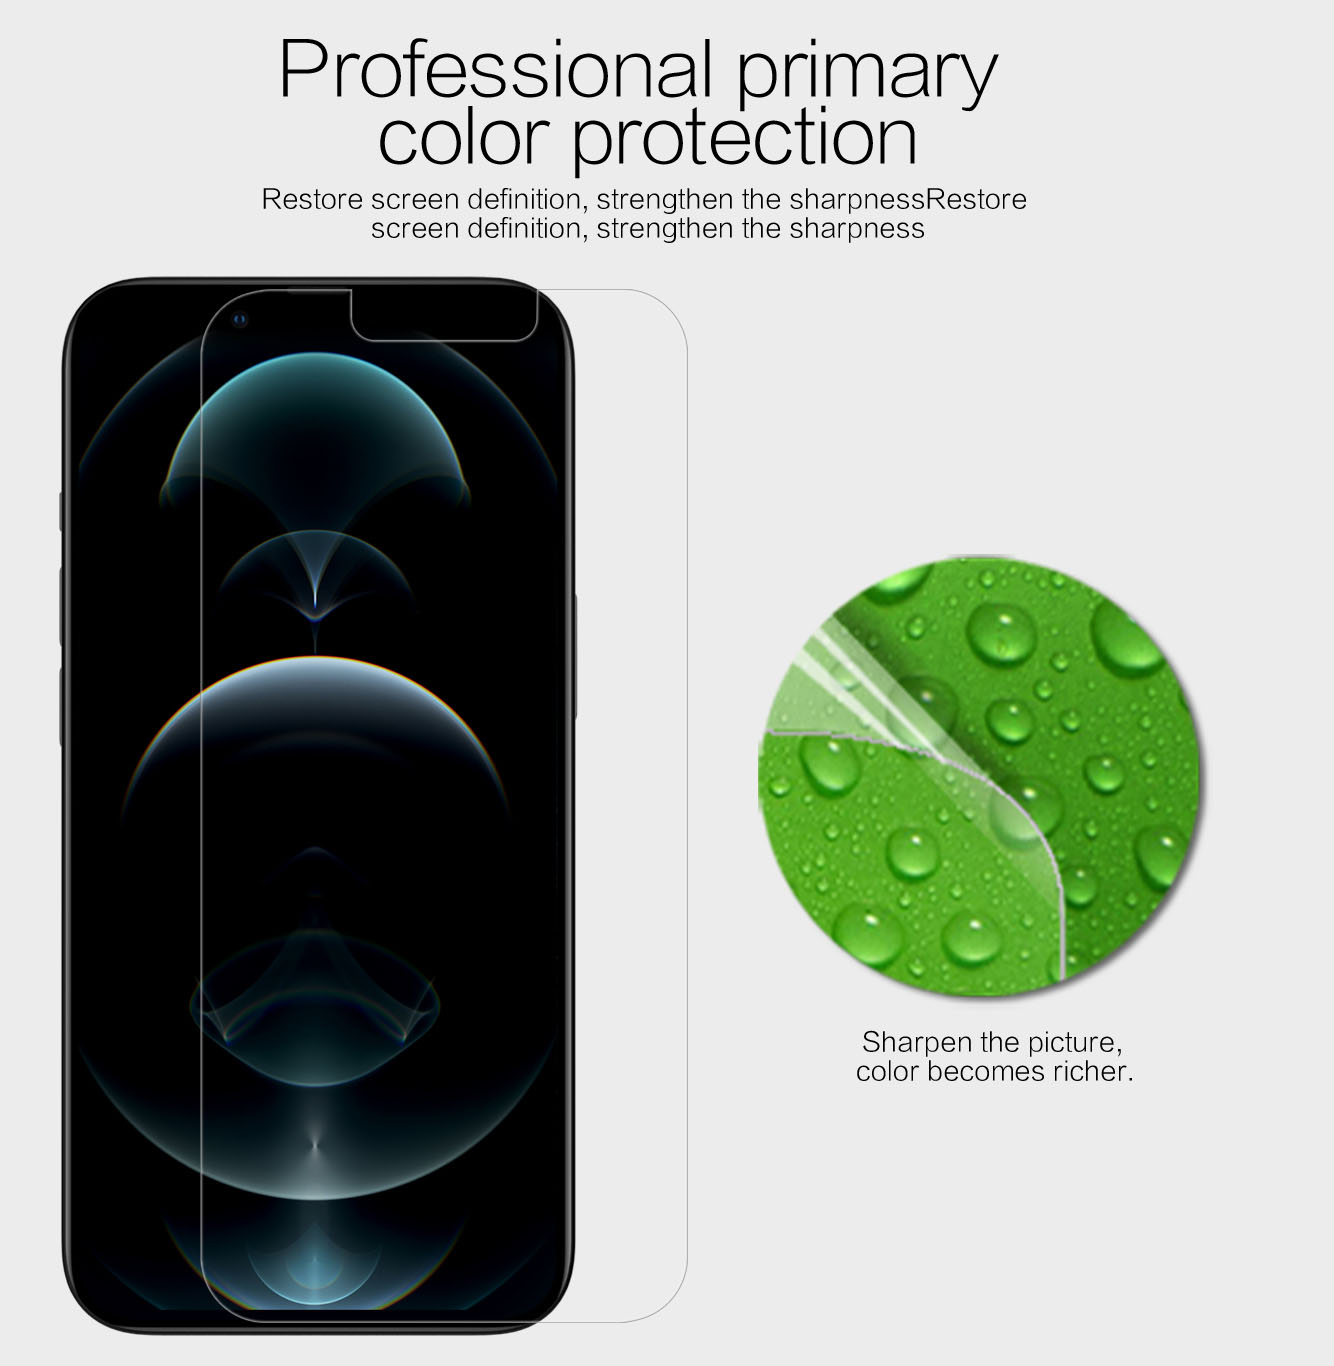 iPhone 13 Pro Max screen protector